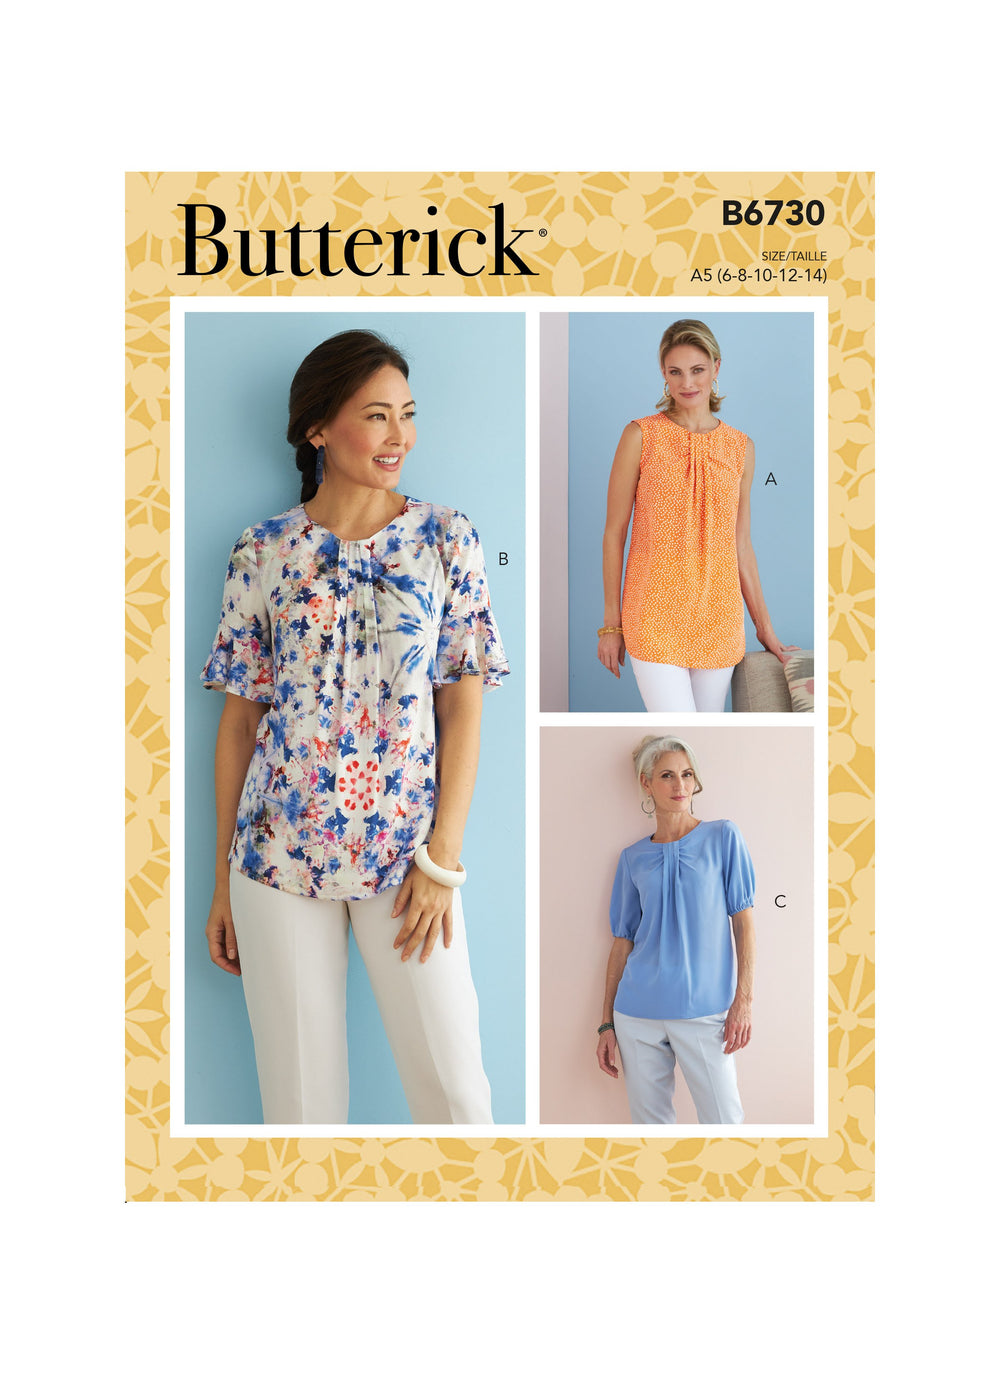 Butterick Sewing Pattern 6730 Misses' Top from Jaycotts Sewing Supplies